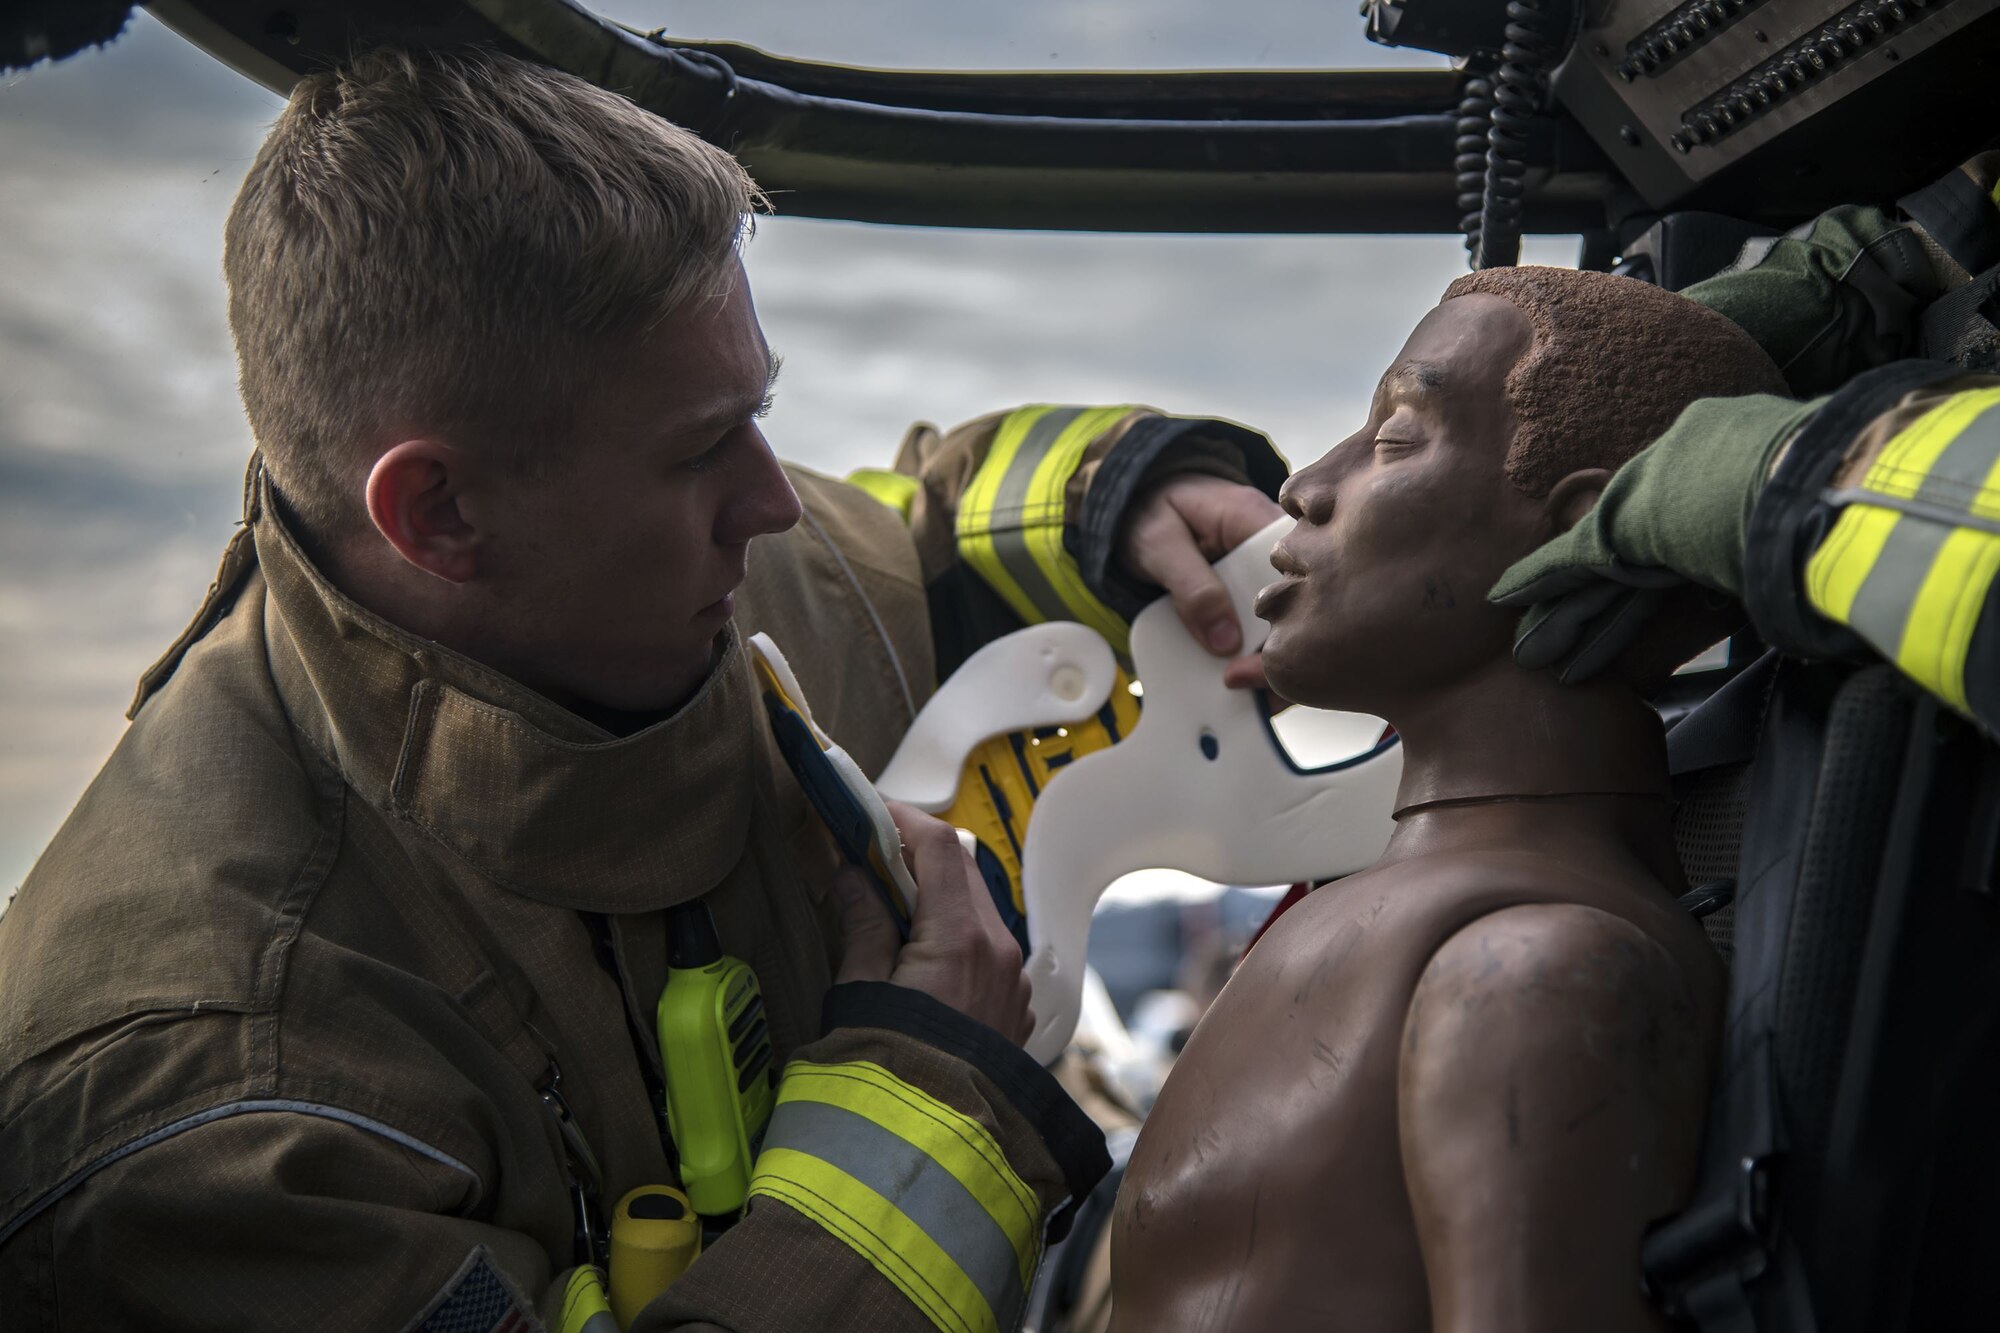 Airman 1st Class Austin Taylor, 23d Civil Engineer Squadron (CES) firefighter, applies a neck brace to a mannequin, Dec. 15, 2017, at Moody Air Force Base, Ga. Members from the 723d Aircraft Maintenance Squadron (AMXS) and 23d Civil Engineer Squadron (CES) participated in a training day to help improve their readiness and get extra practice at their crafts. The AMXS performed maintenance on helicopters and the CES conducted rescue operations by extinguishing a mock fire within an HH-60G Pave Hawk and extracting injured victims. (U.S. Air Force photo by Airman Eugene Oliver)